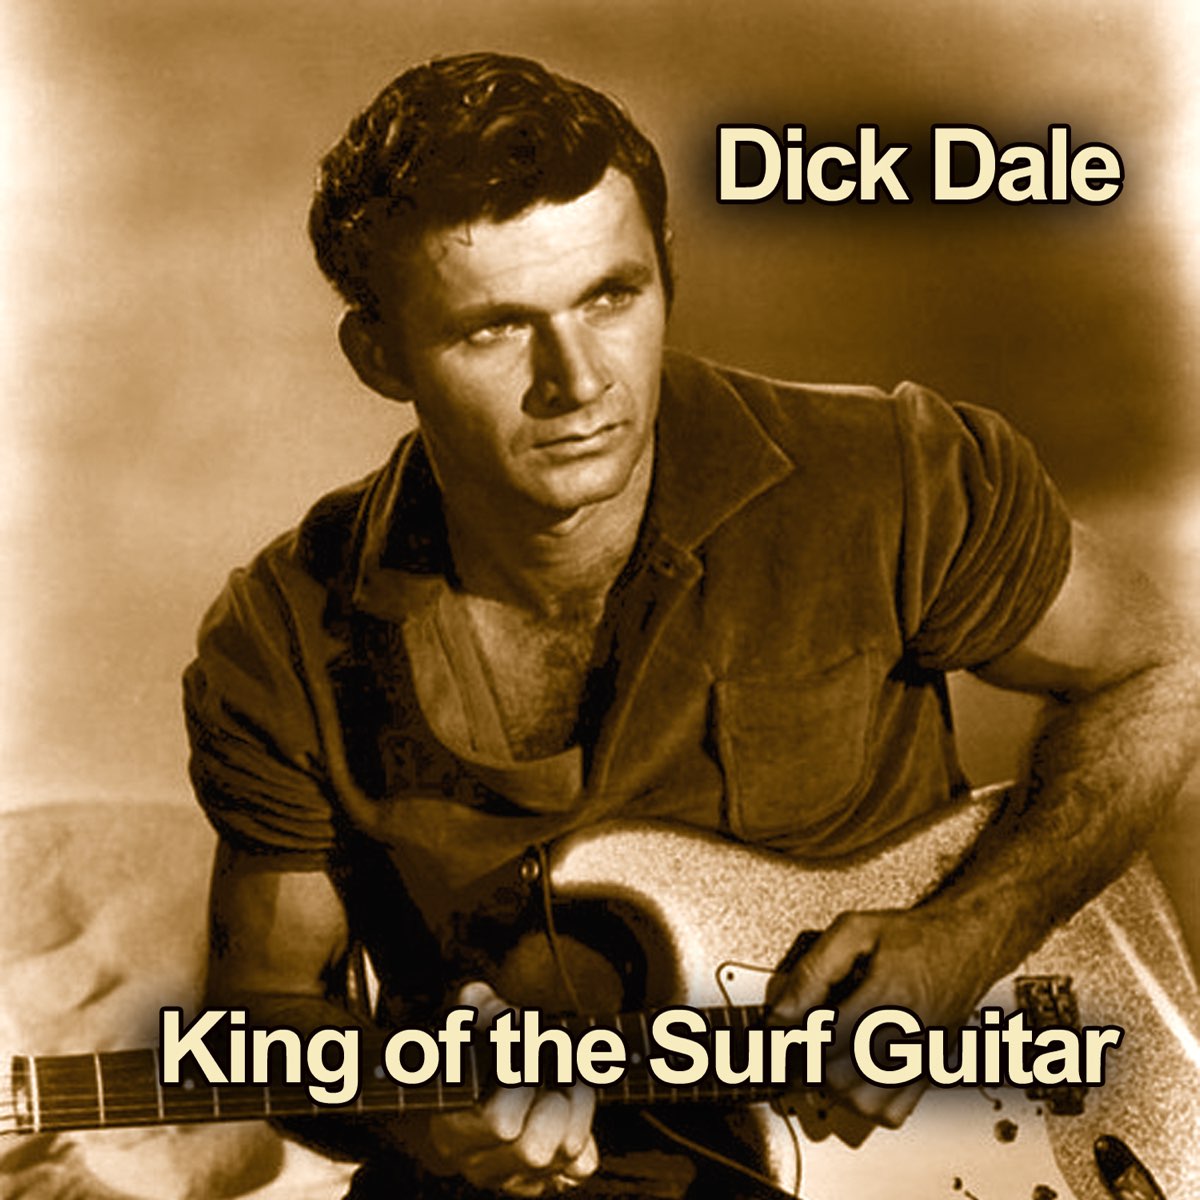 Dick Dale King of